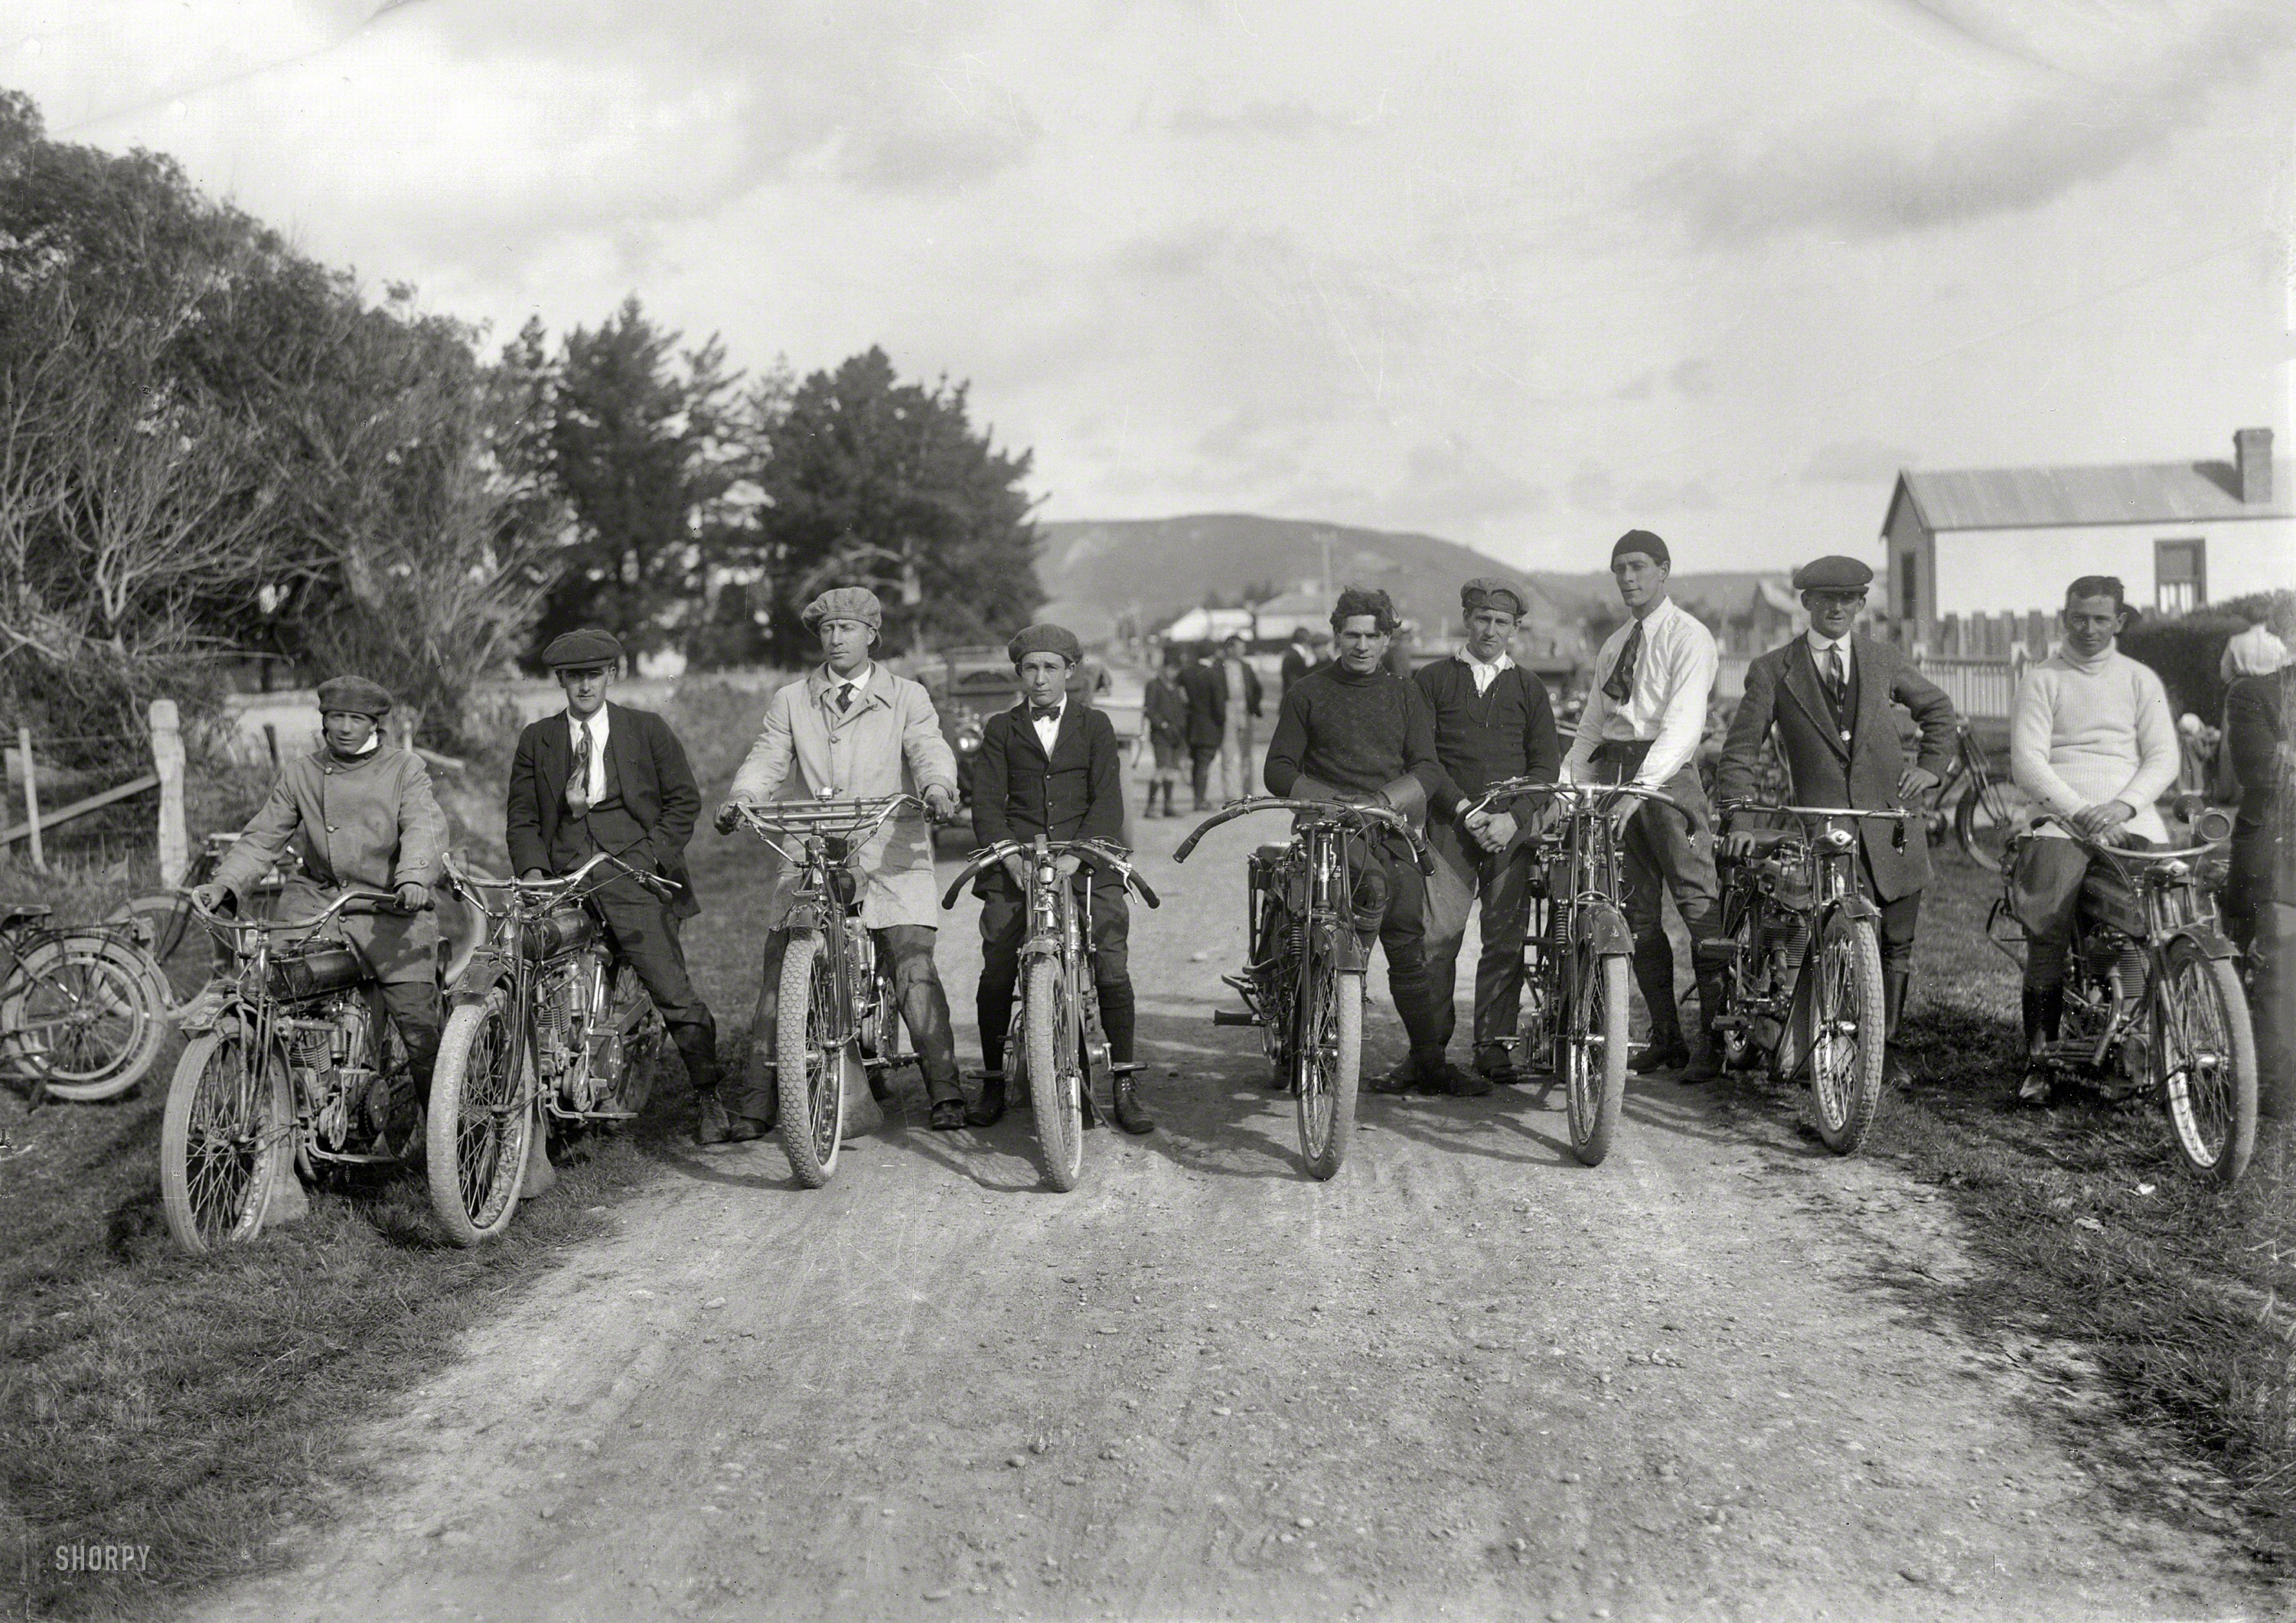 New Zealand circa 1920. "Young men on motorcycles, probably Wanganui region." Ready to run some errands, and you'd better not get in the way. Or else they might be late. Tesla Studios glass negative. View full size.